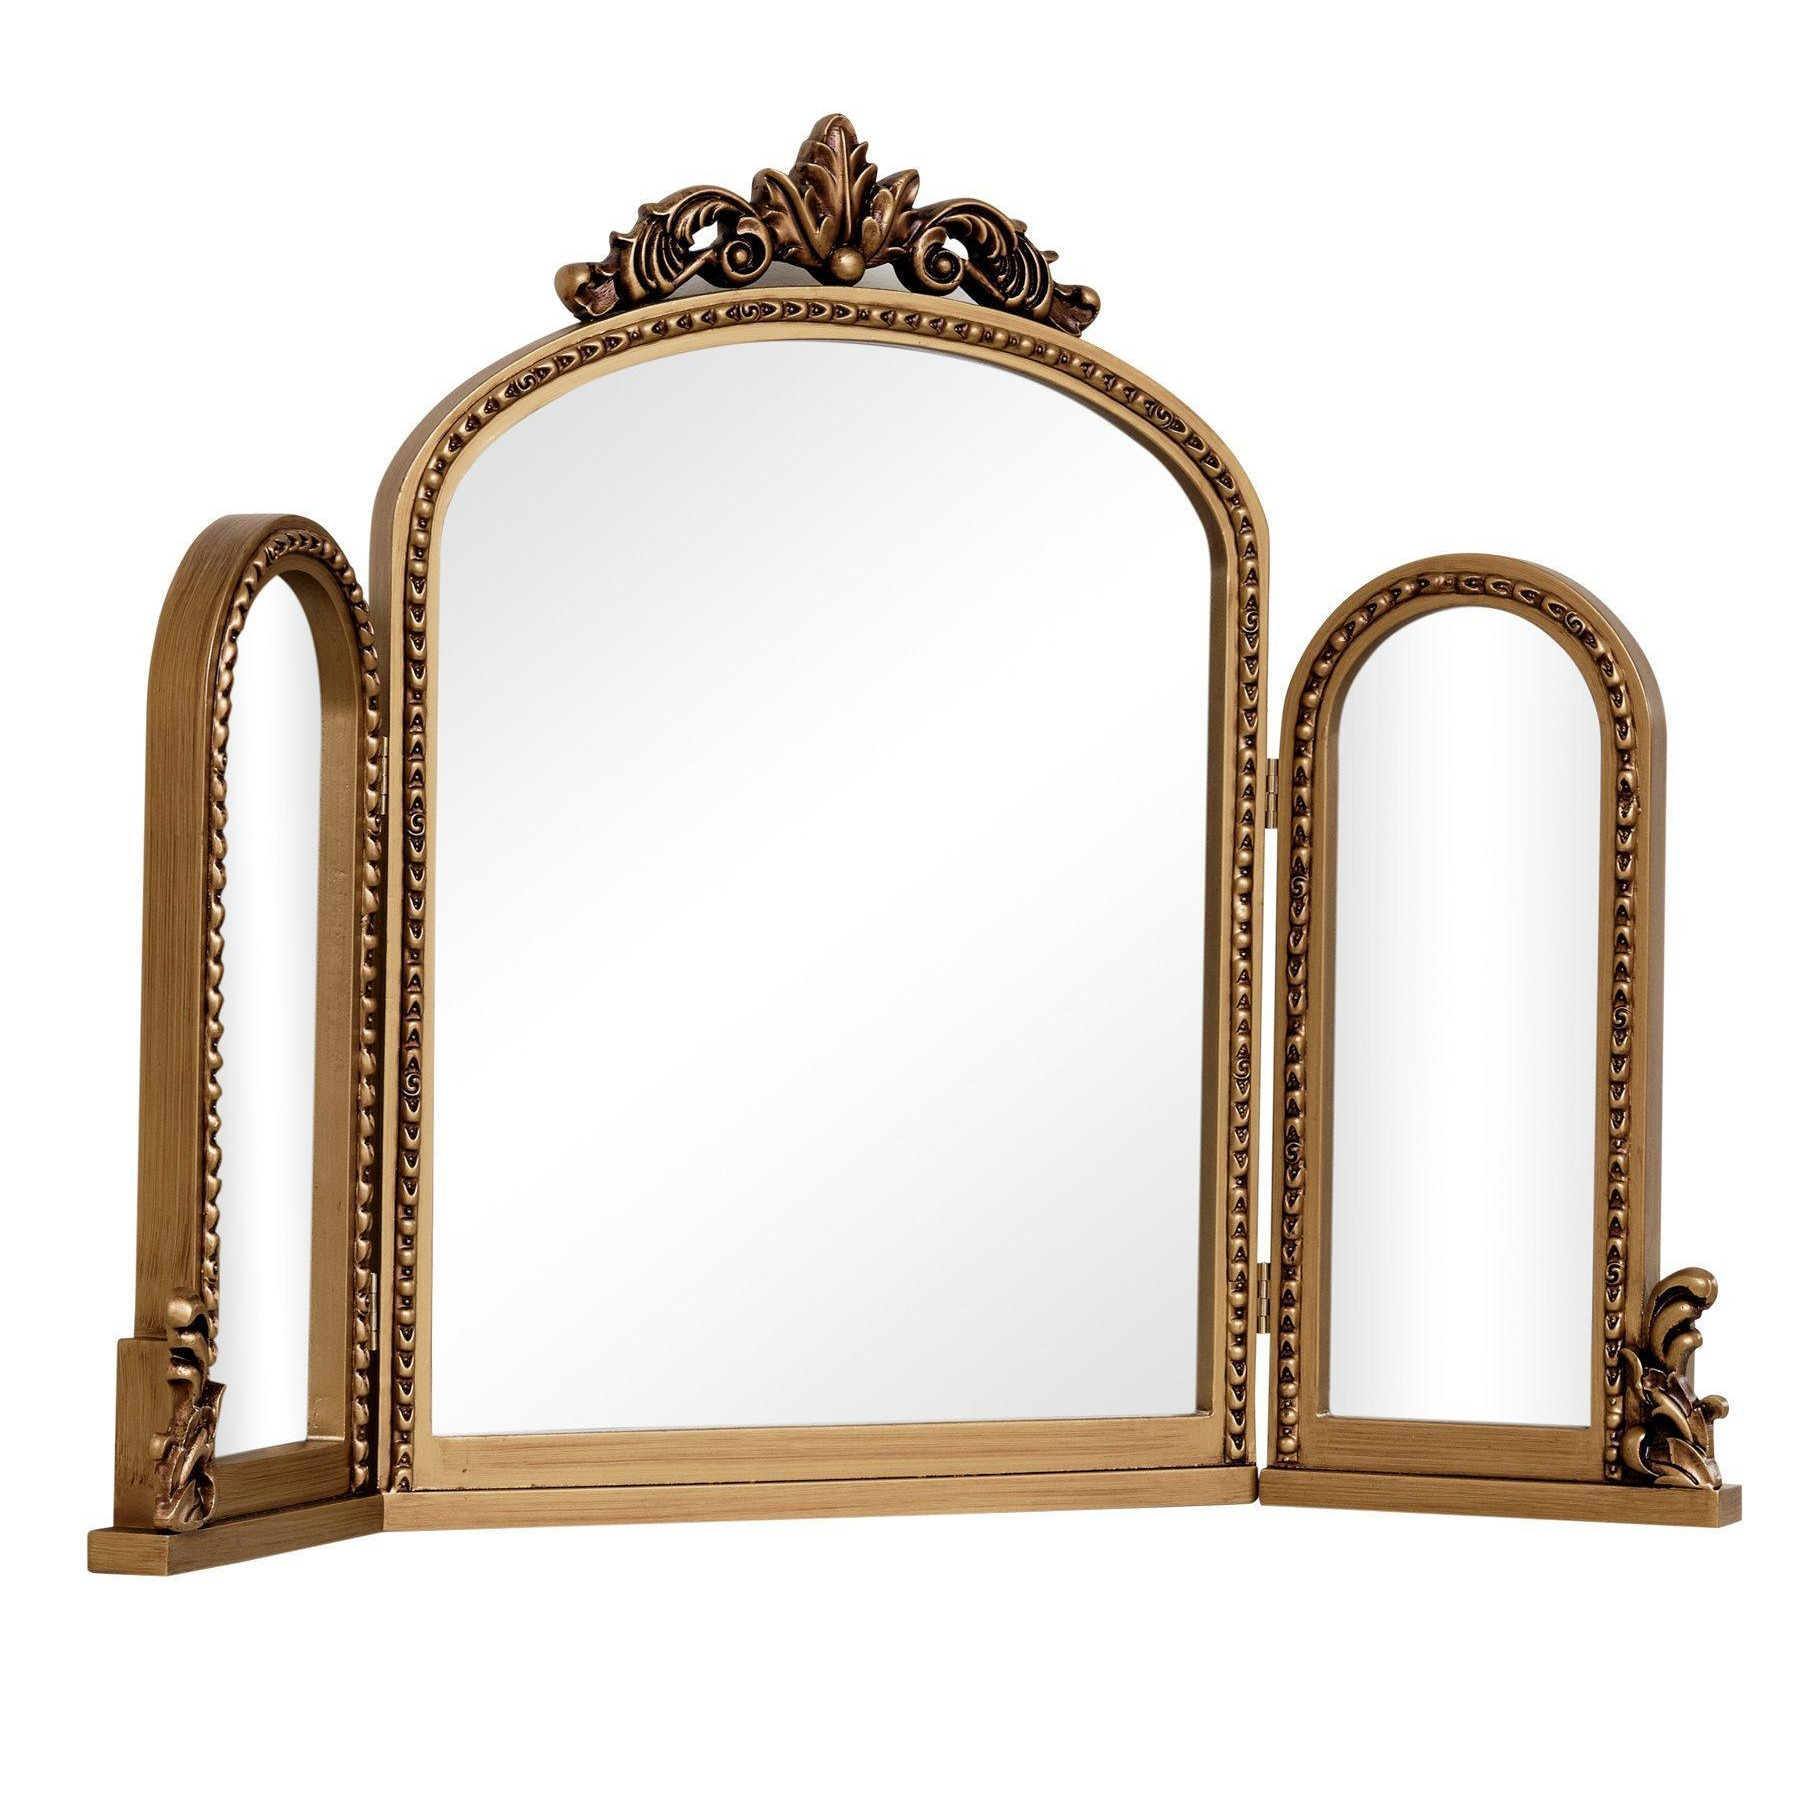 Gold Ornate Arched Triple Dressing Table Mirror 80cm X 56cm - image 1